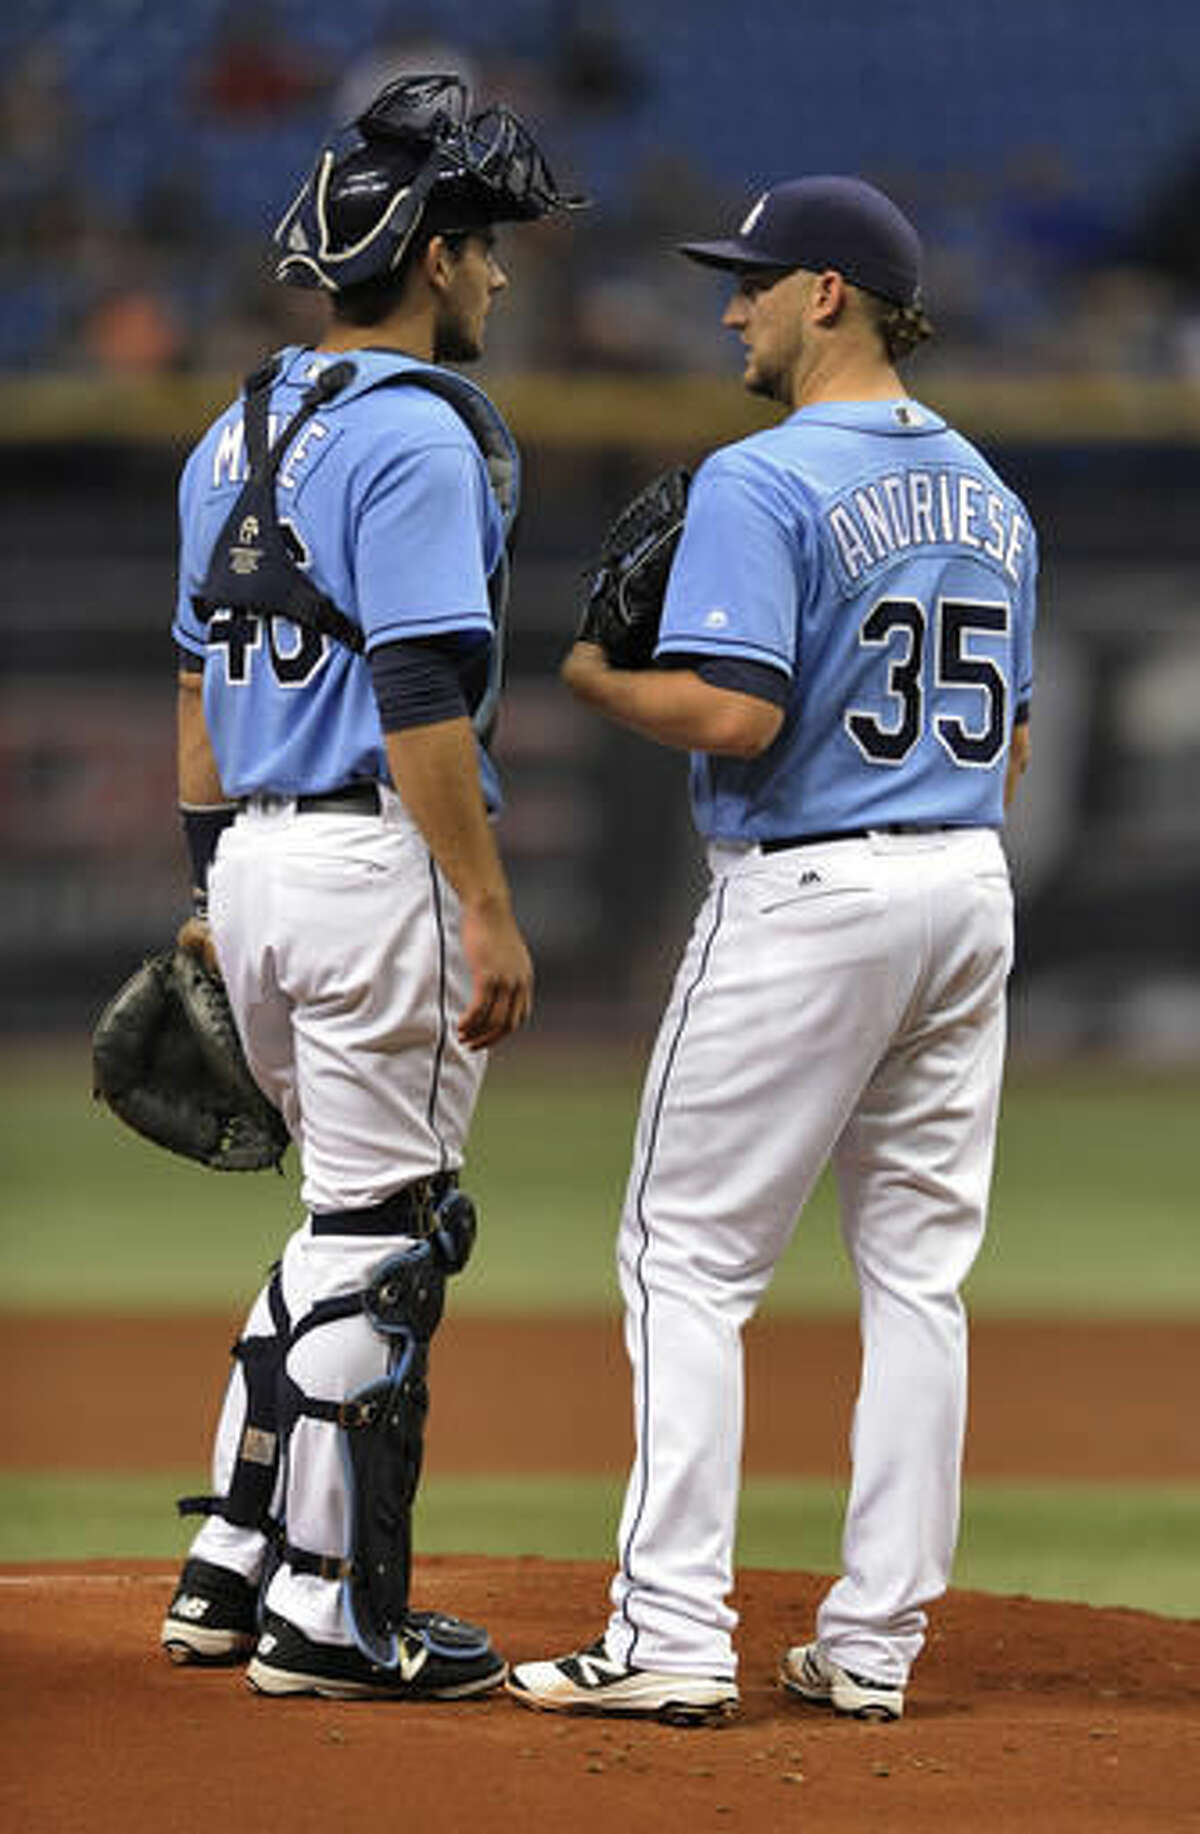 Tampa Bay Rays catcher Luke Maile, left, talks with starter Matt Andriese, right, on the mound during the first inning of a baseball game against the Minnesota Twins, Sunday, Aug. 7, 2016, in St. Petersburg, Fla. (AP Photo/Steve Nesius